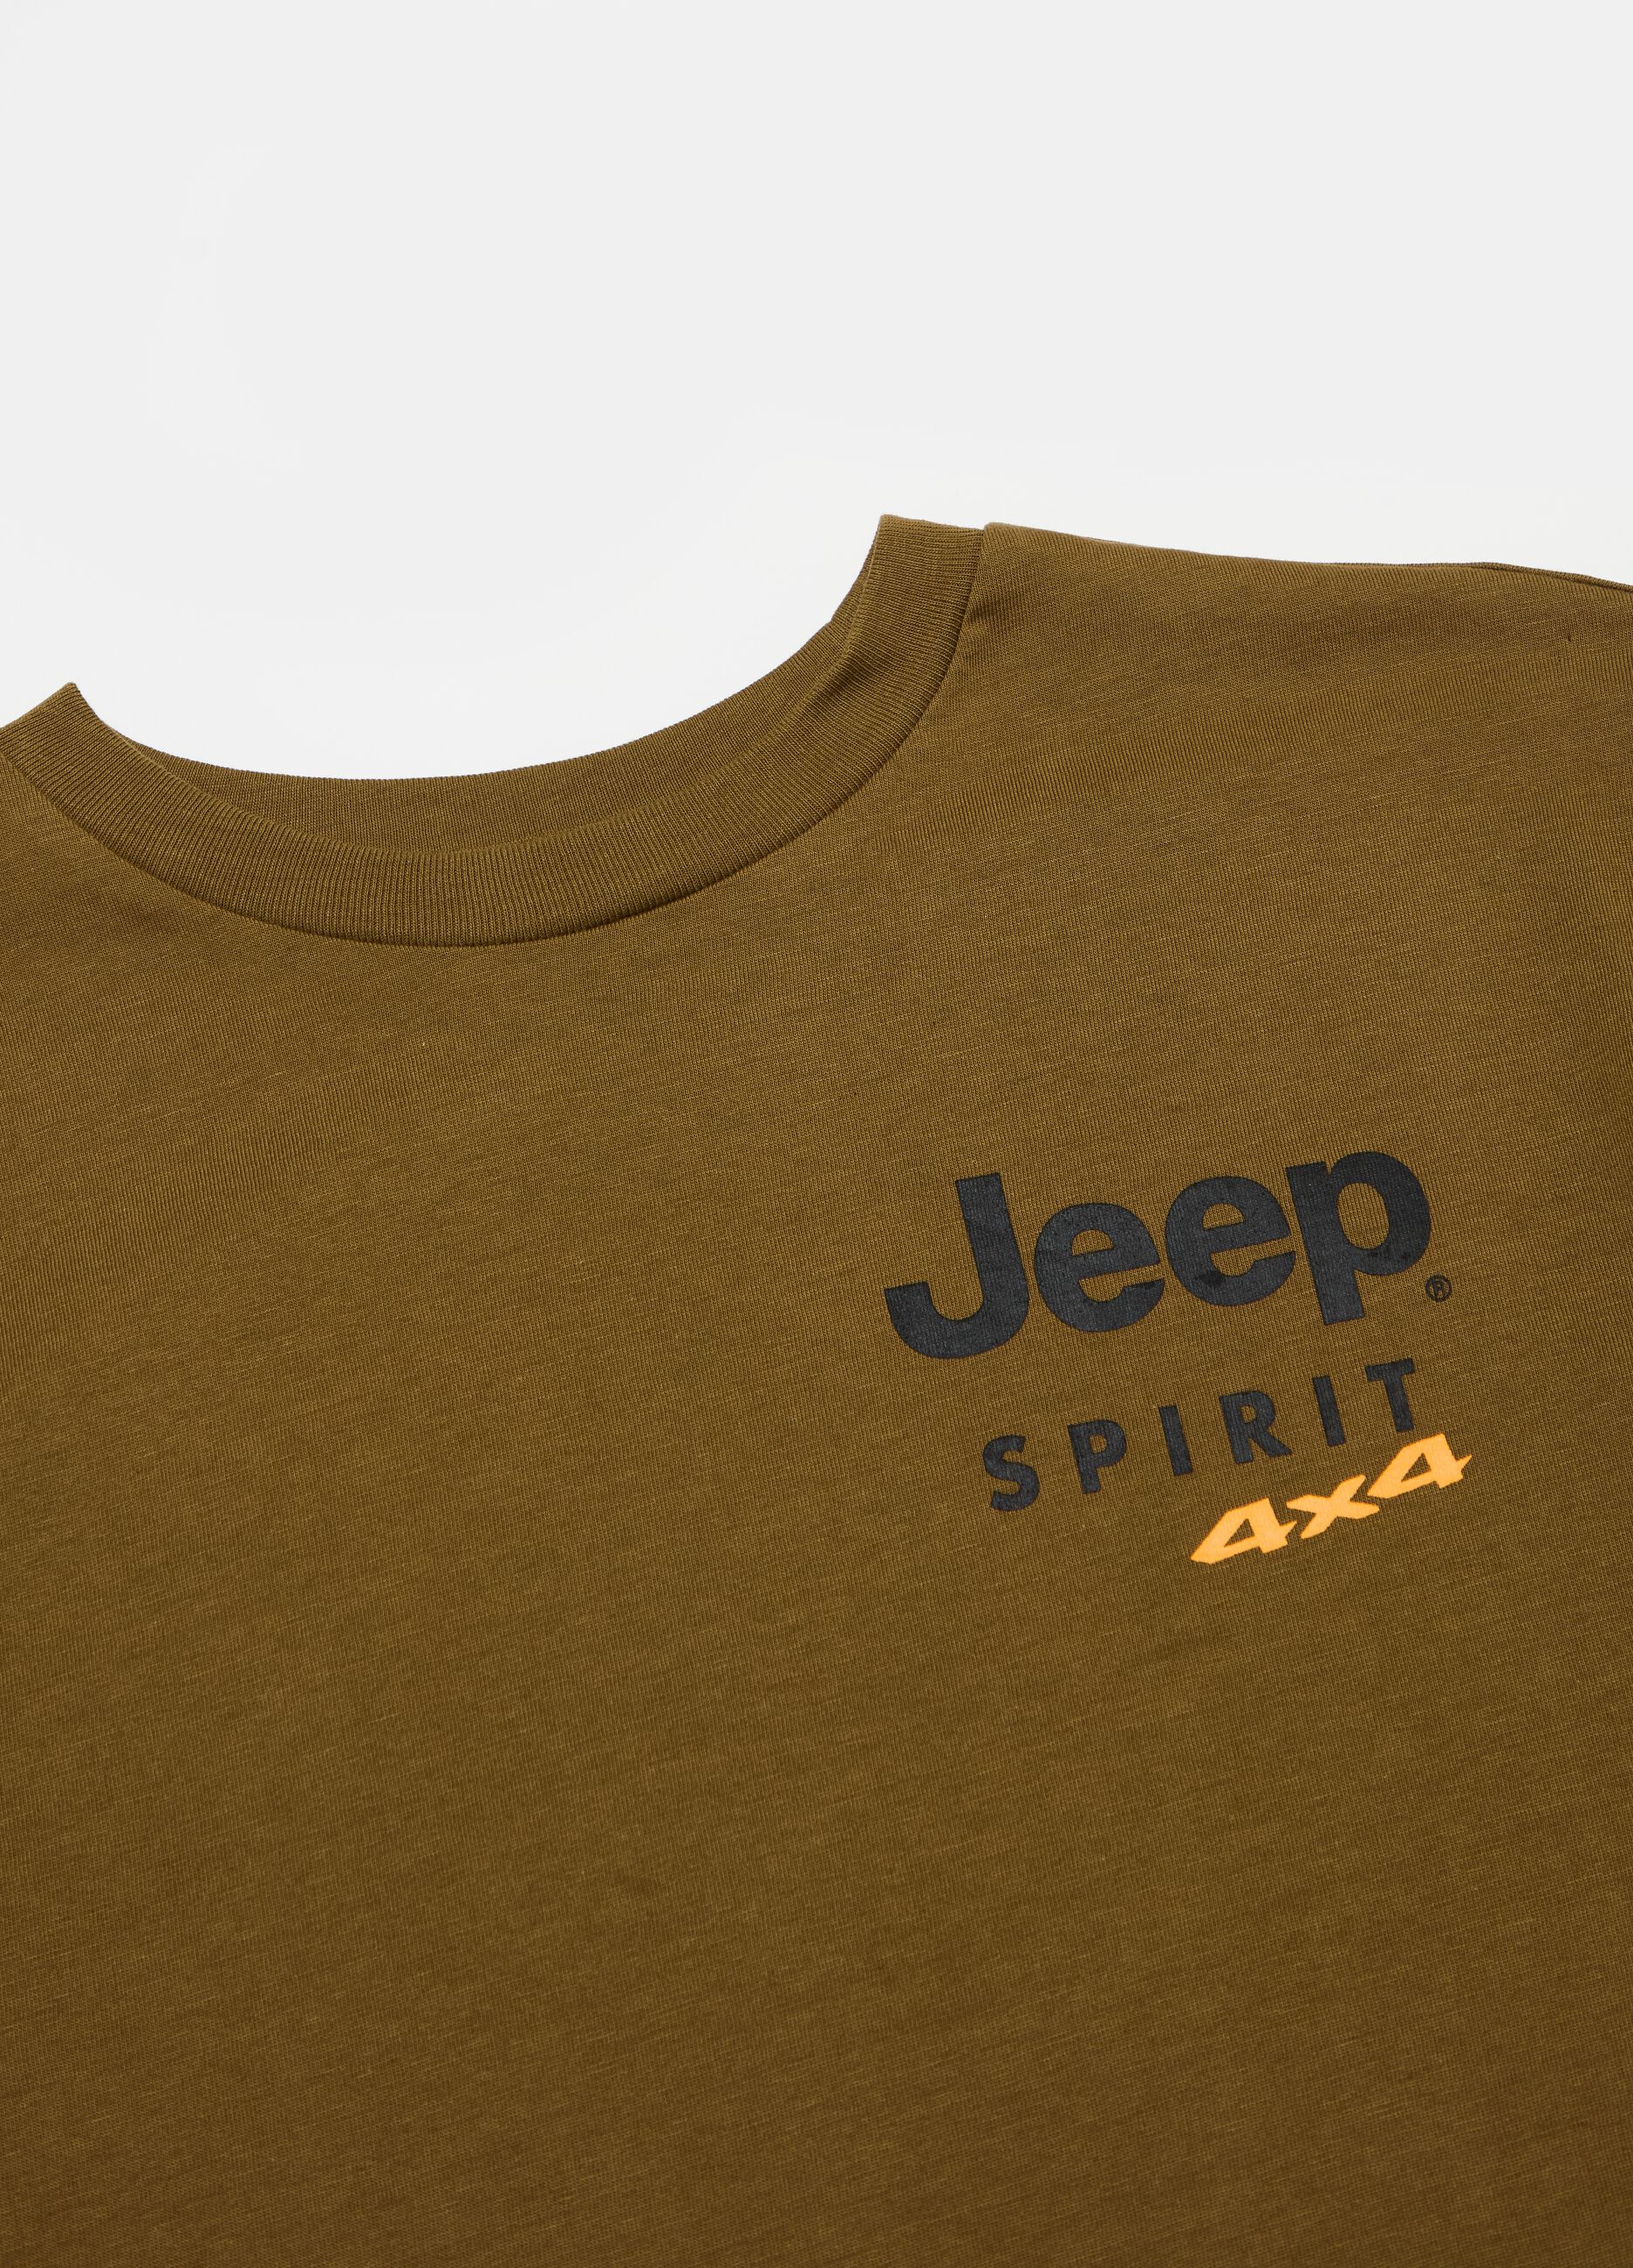 Cotton T-shirt with Jeep print